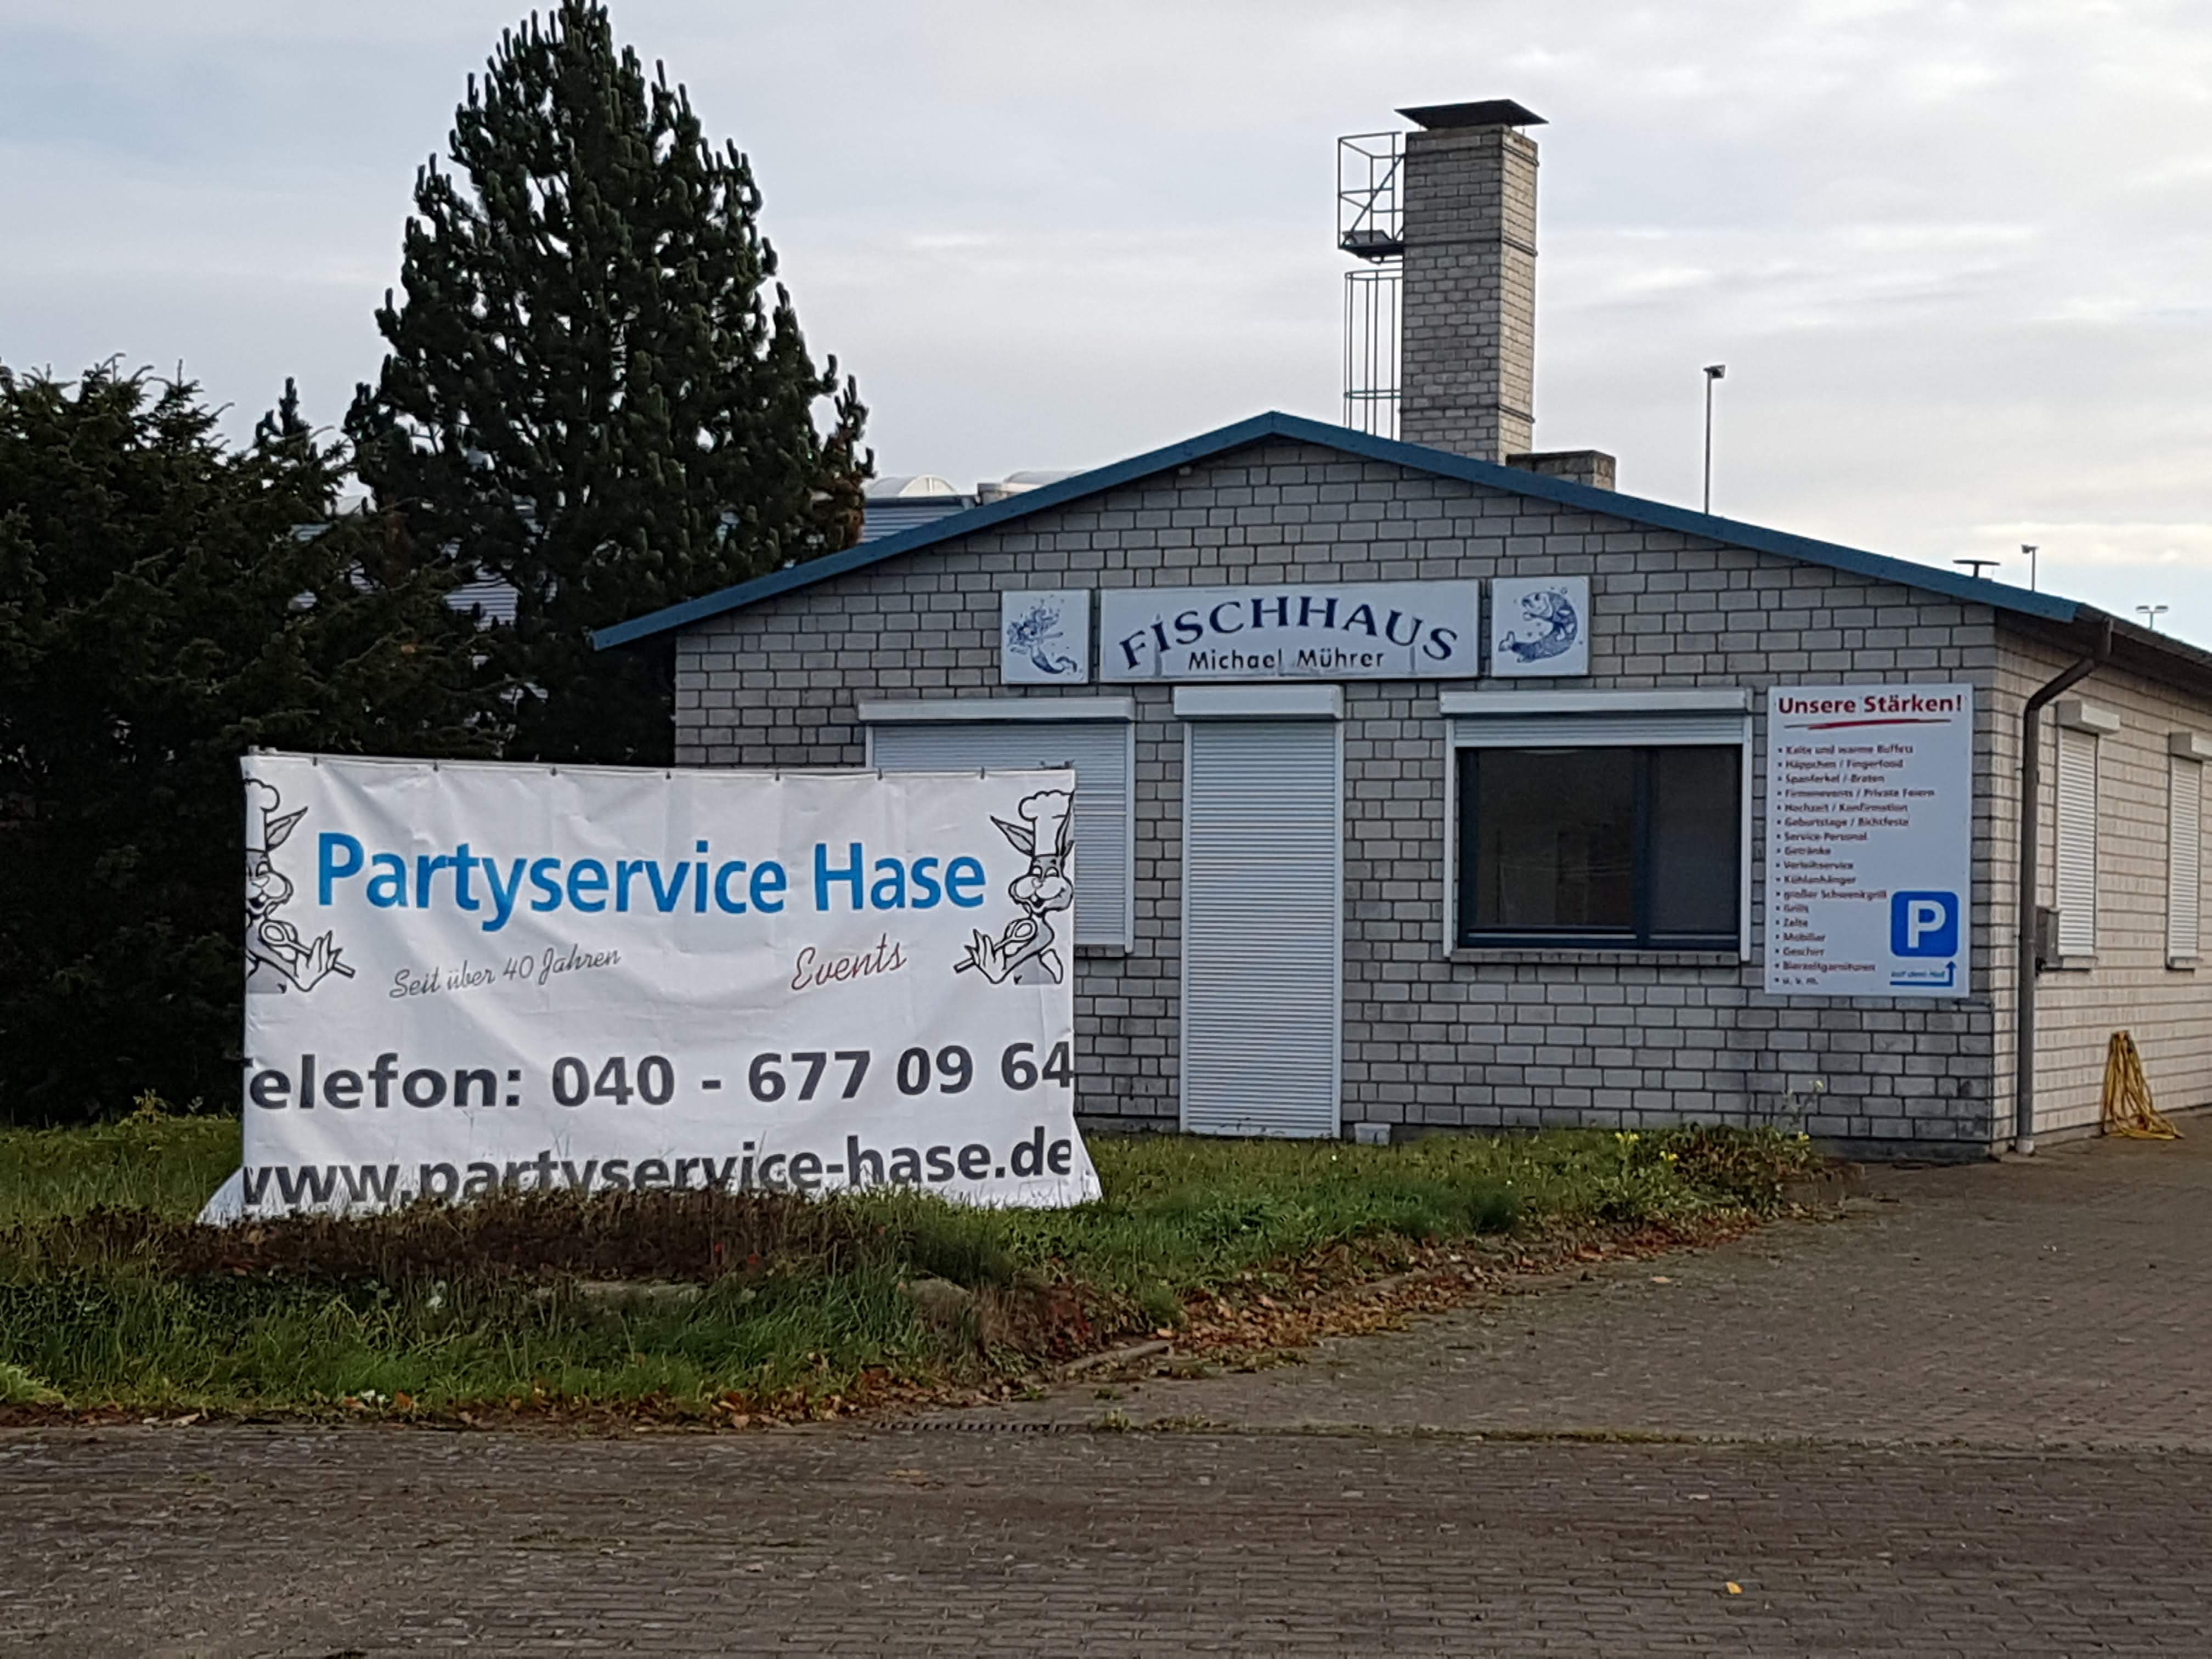 Partyservice Hase in Wahlstedt